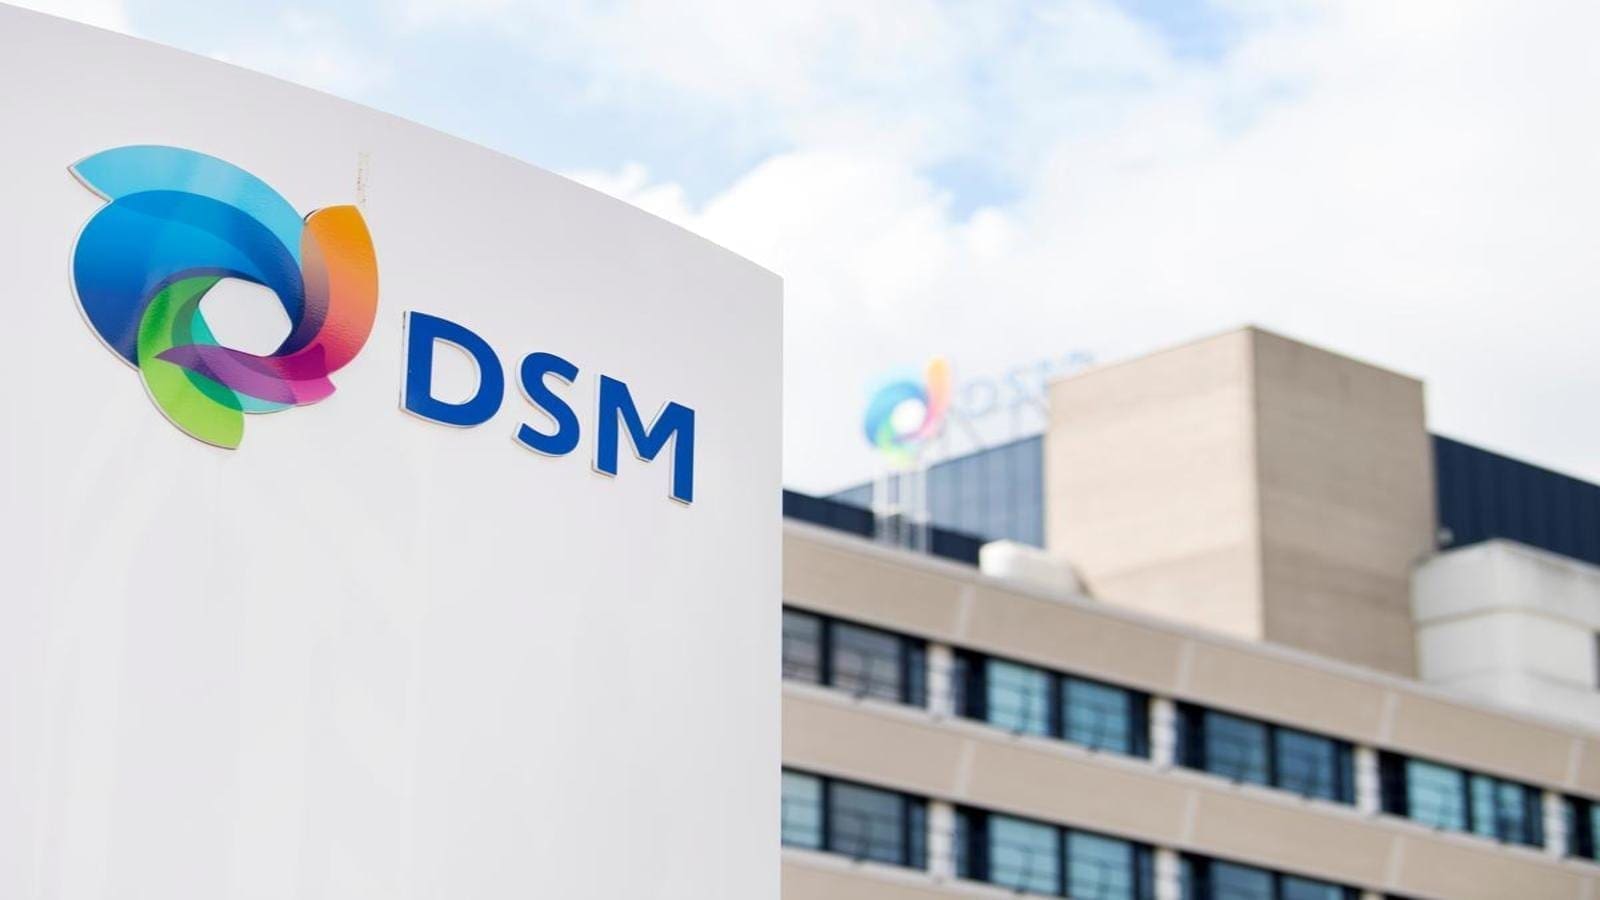 DSM acquires Amyris’ flavour and fragrance business to bolster nutritional ingredients portfolio